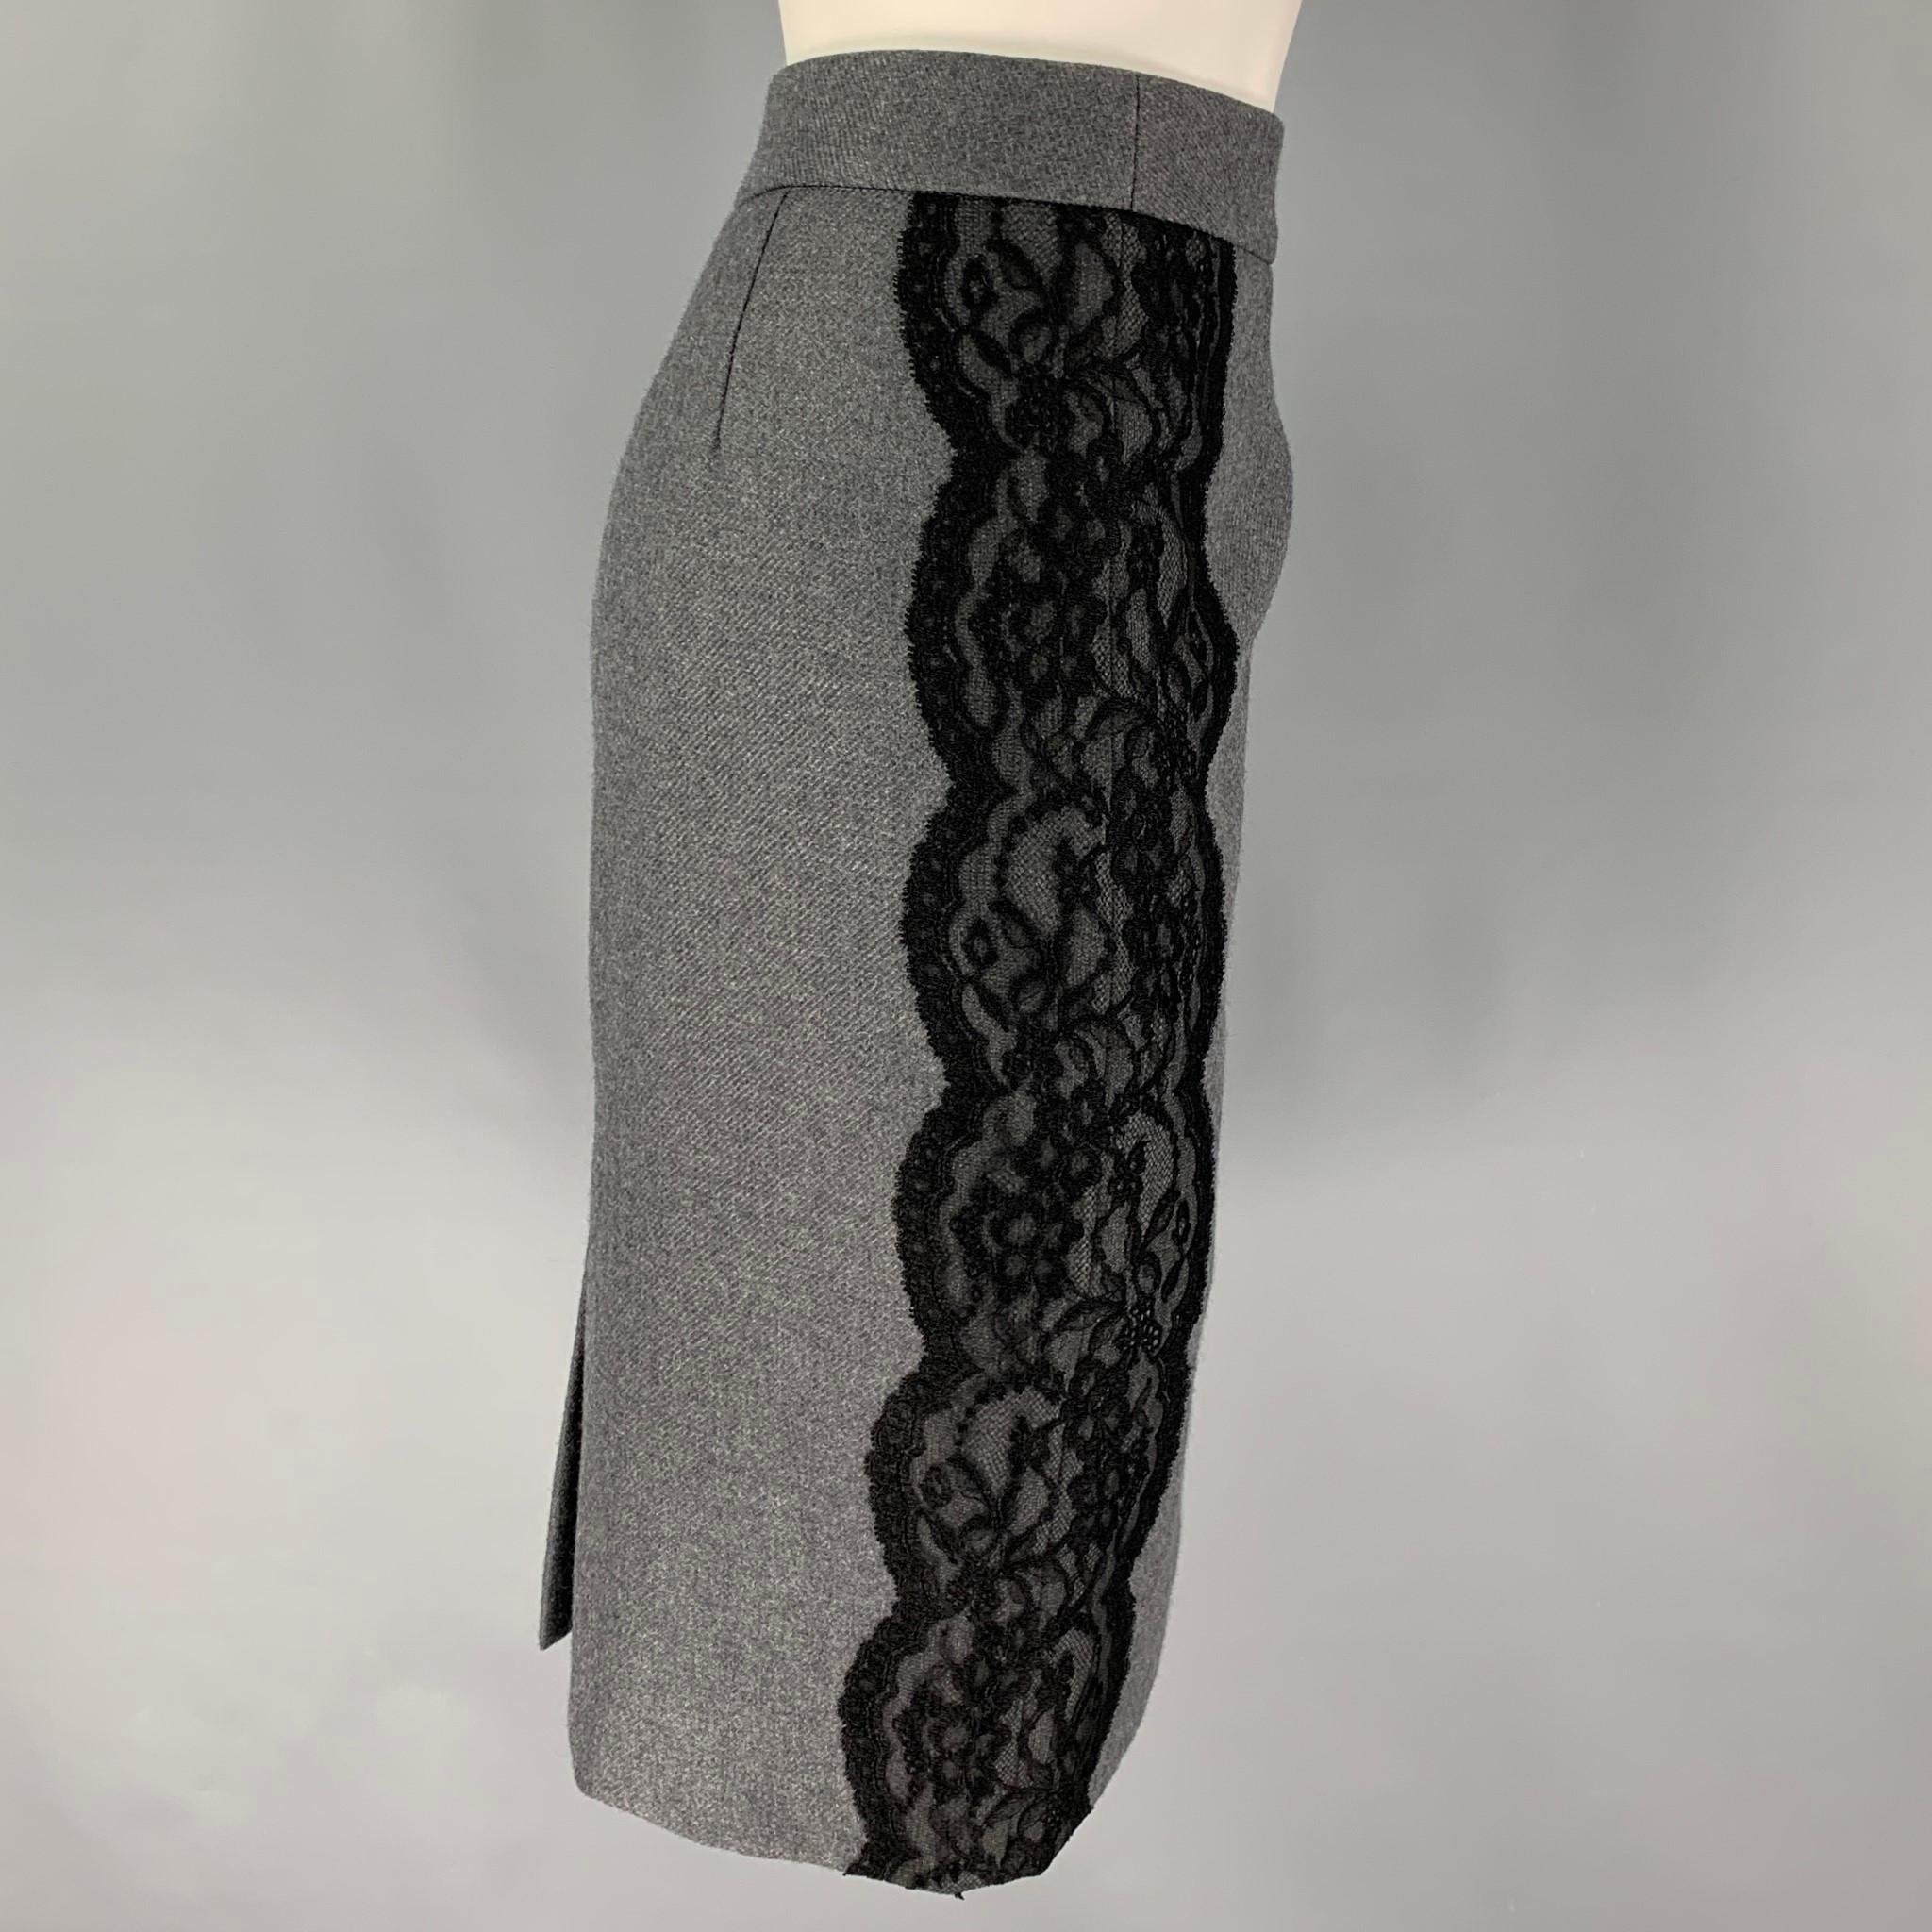 VALENTINO skirt comes in a grey wool with a slip liner featuring a pencil style, black lace panels, back slit, and a back zip up closure. Made in Italy. 

Very Good Pre-Owned Condition.
Marked: 46/10

Measurements:

Waist: 32 in.
Hip: 40 in.
Length: